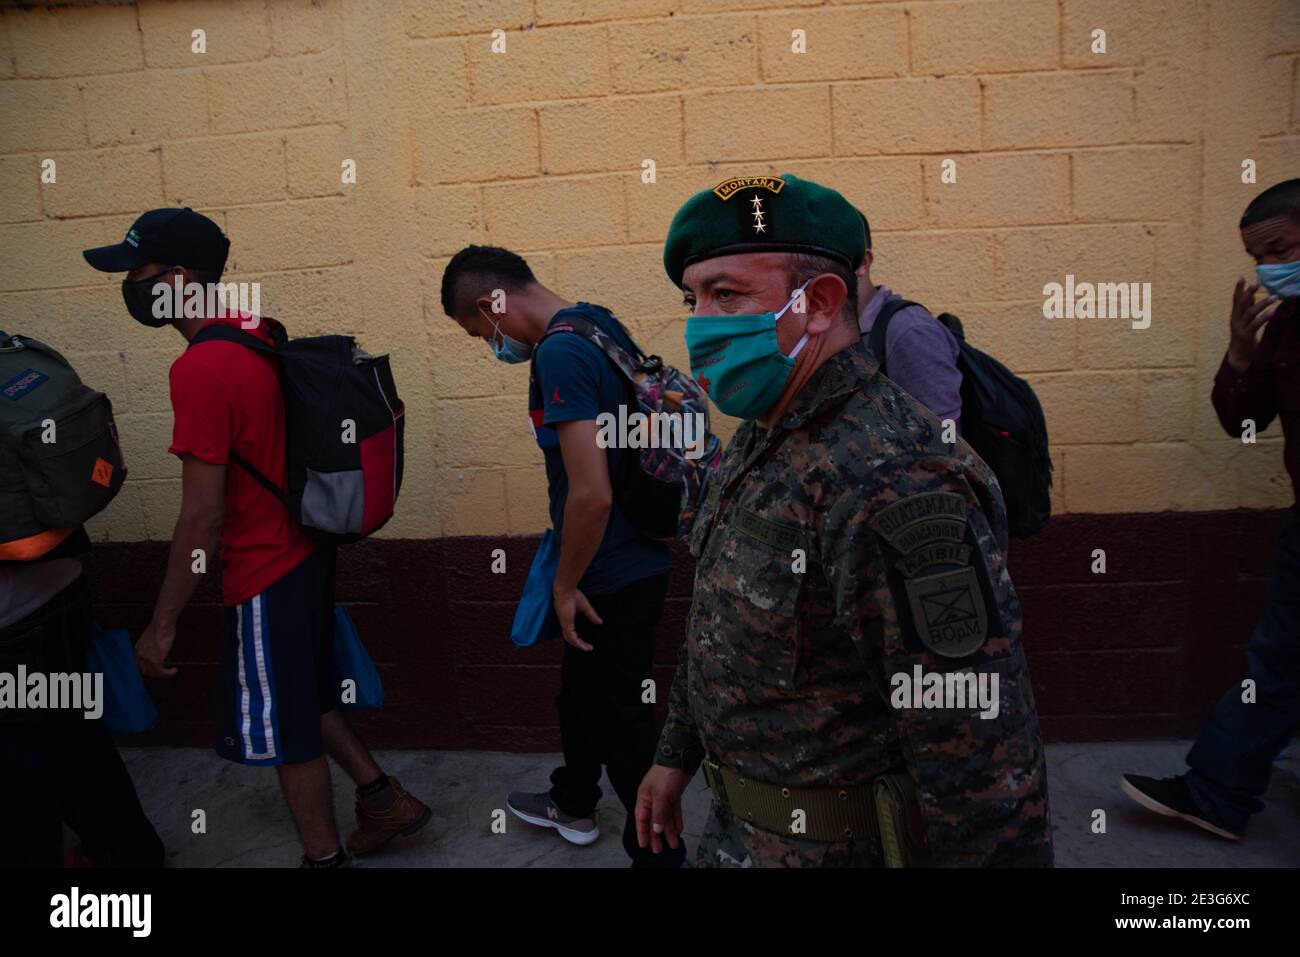 January 18, 2021: Moore than 35 inmigrants who are part of the Caravan, where detained by members of the Guatemalan army in the city of Coatepeque. This group where taken to a safe refugee on the frontier with México. Credit: Hector Adolfo Quintanar Perez/ZUMA Wire/Alamy Live News Stock Photo